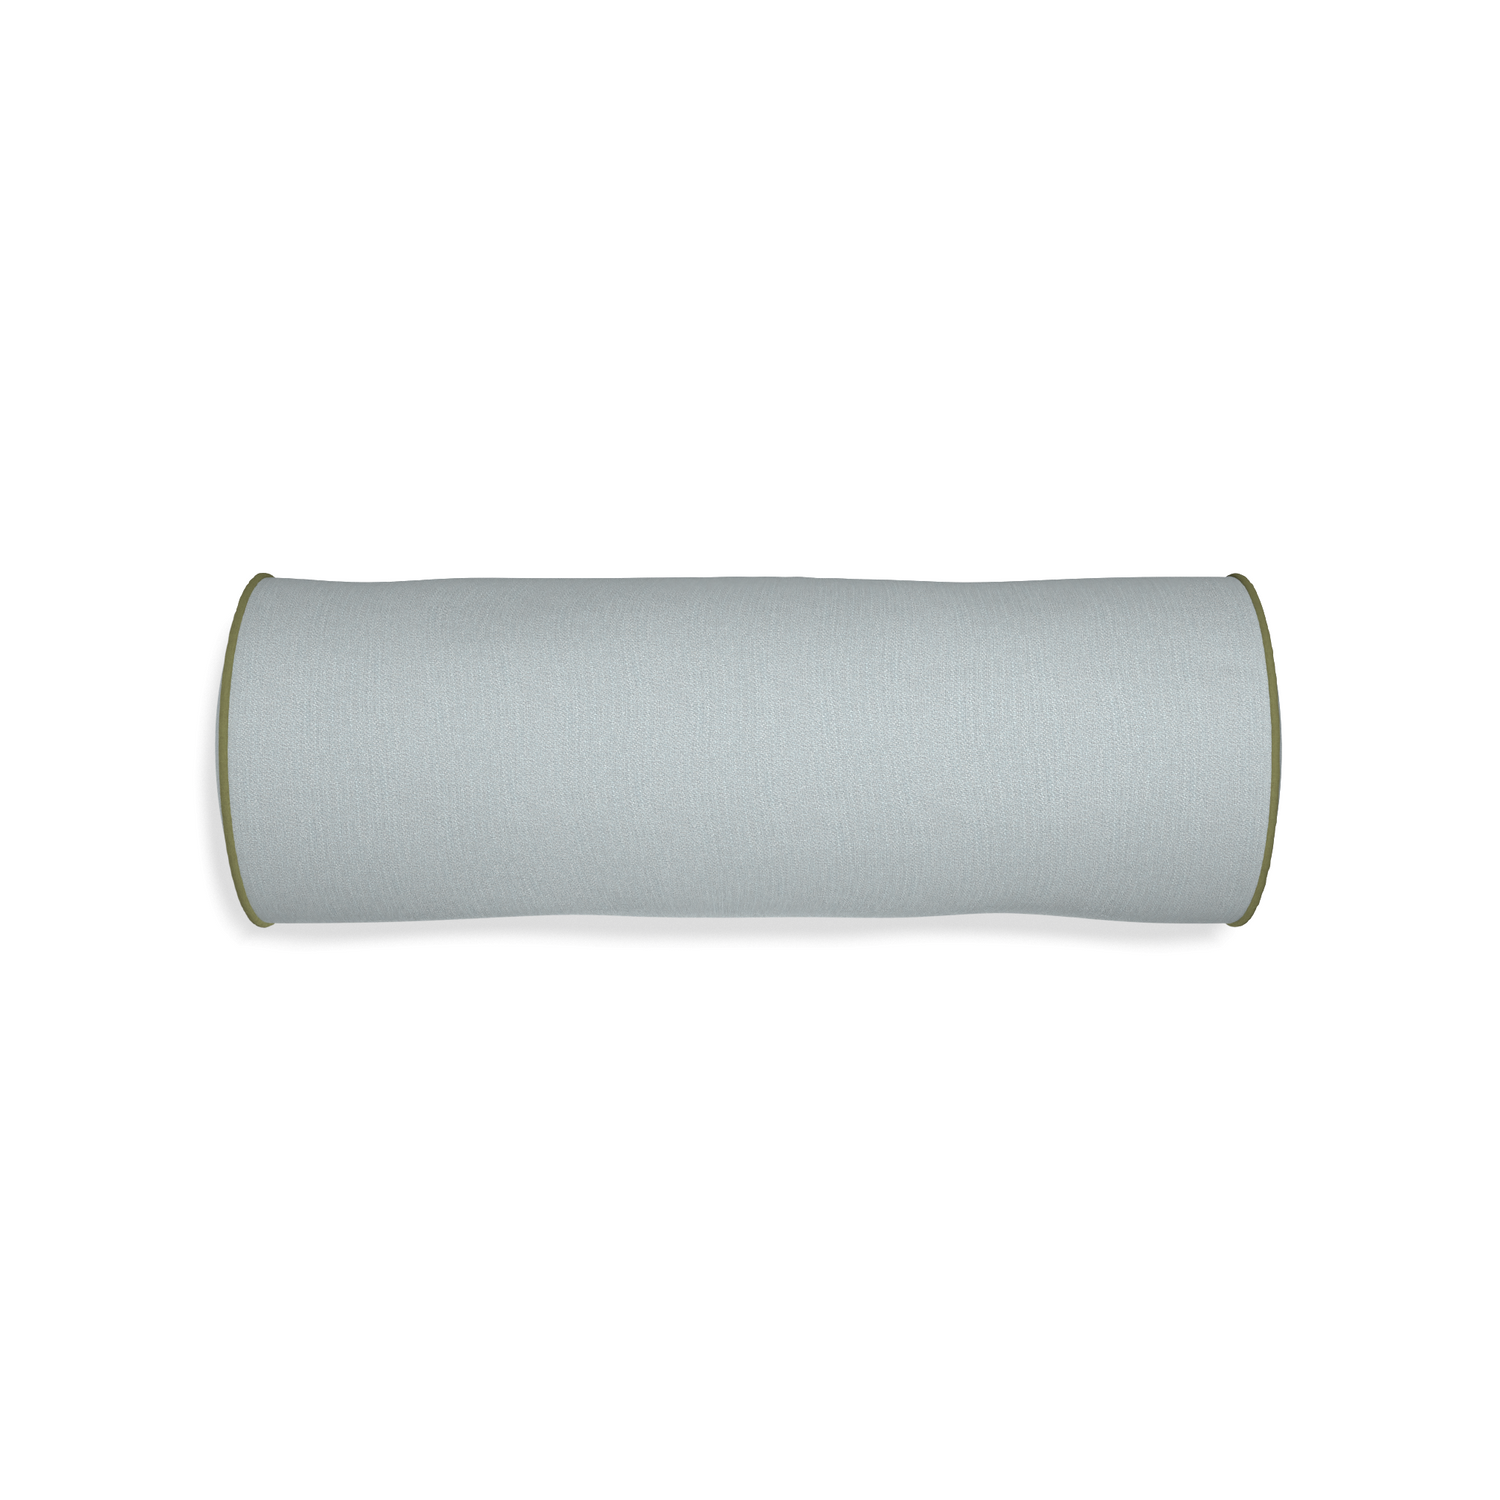 Bolster sea custom grey bluepillow with moss piping on white background